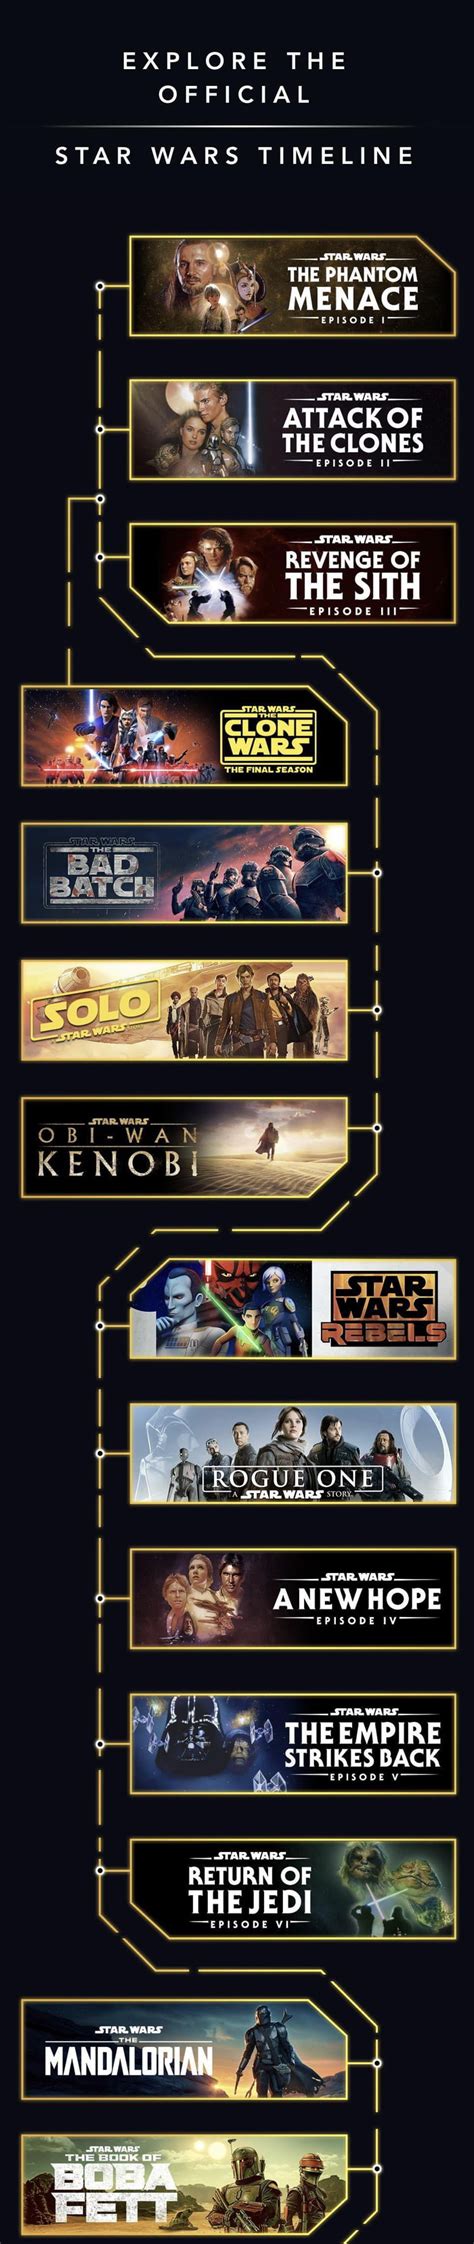 Official Star Wars Timeline Fixed 9gag